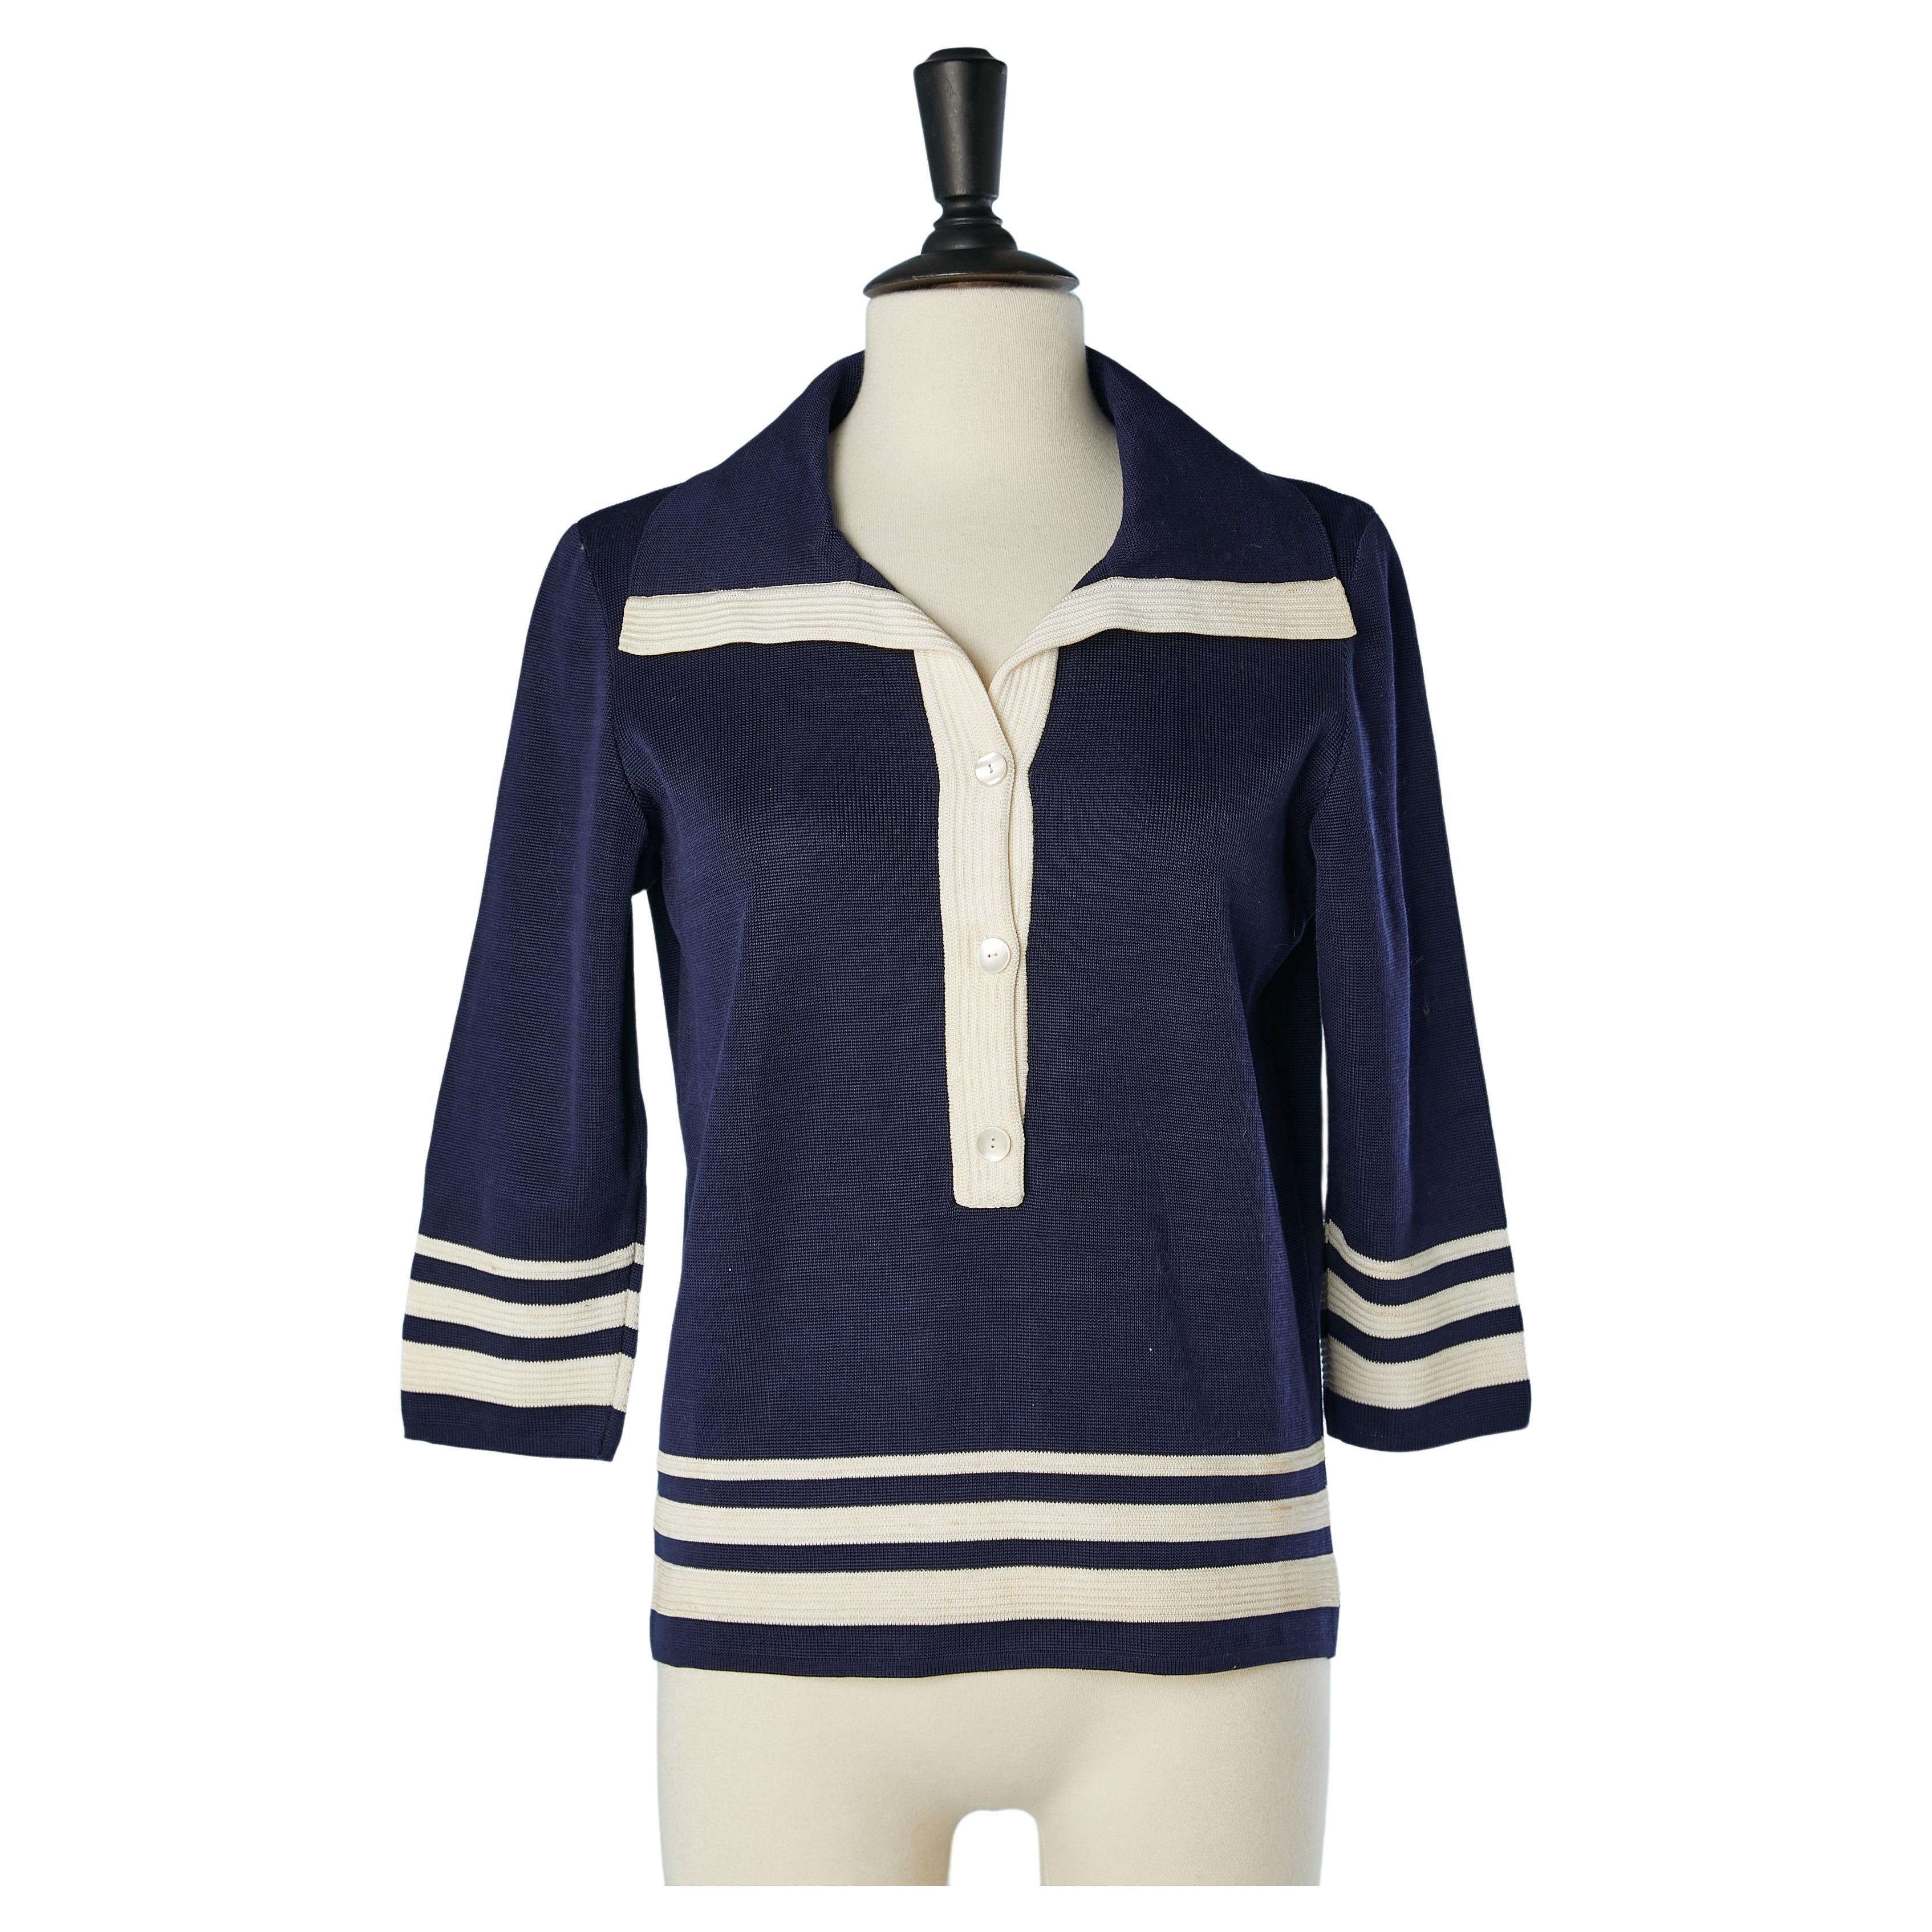 Navy blue rayon knit polo-shirt with white stripes Jeanne Lanvin Castillo 